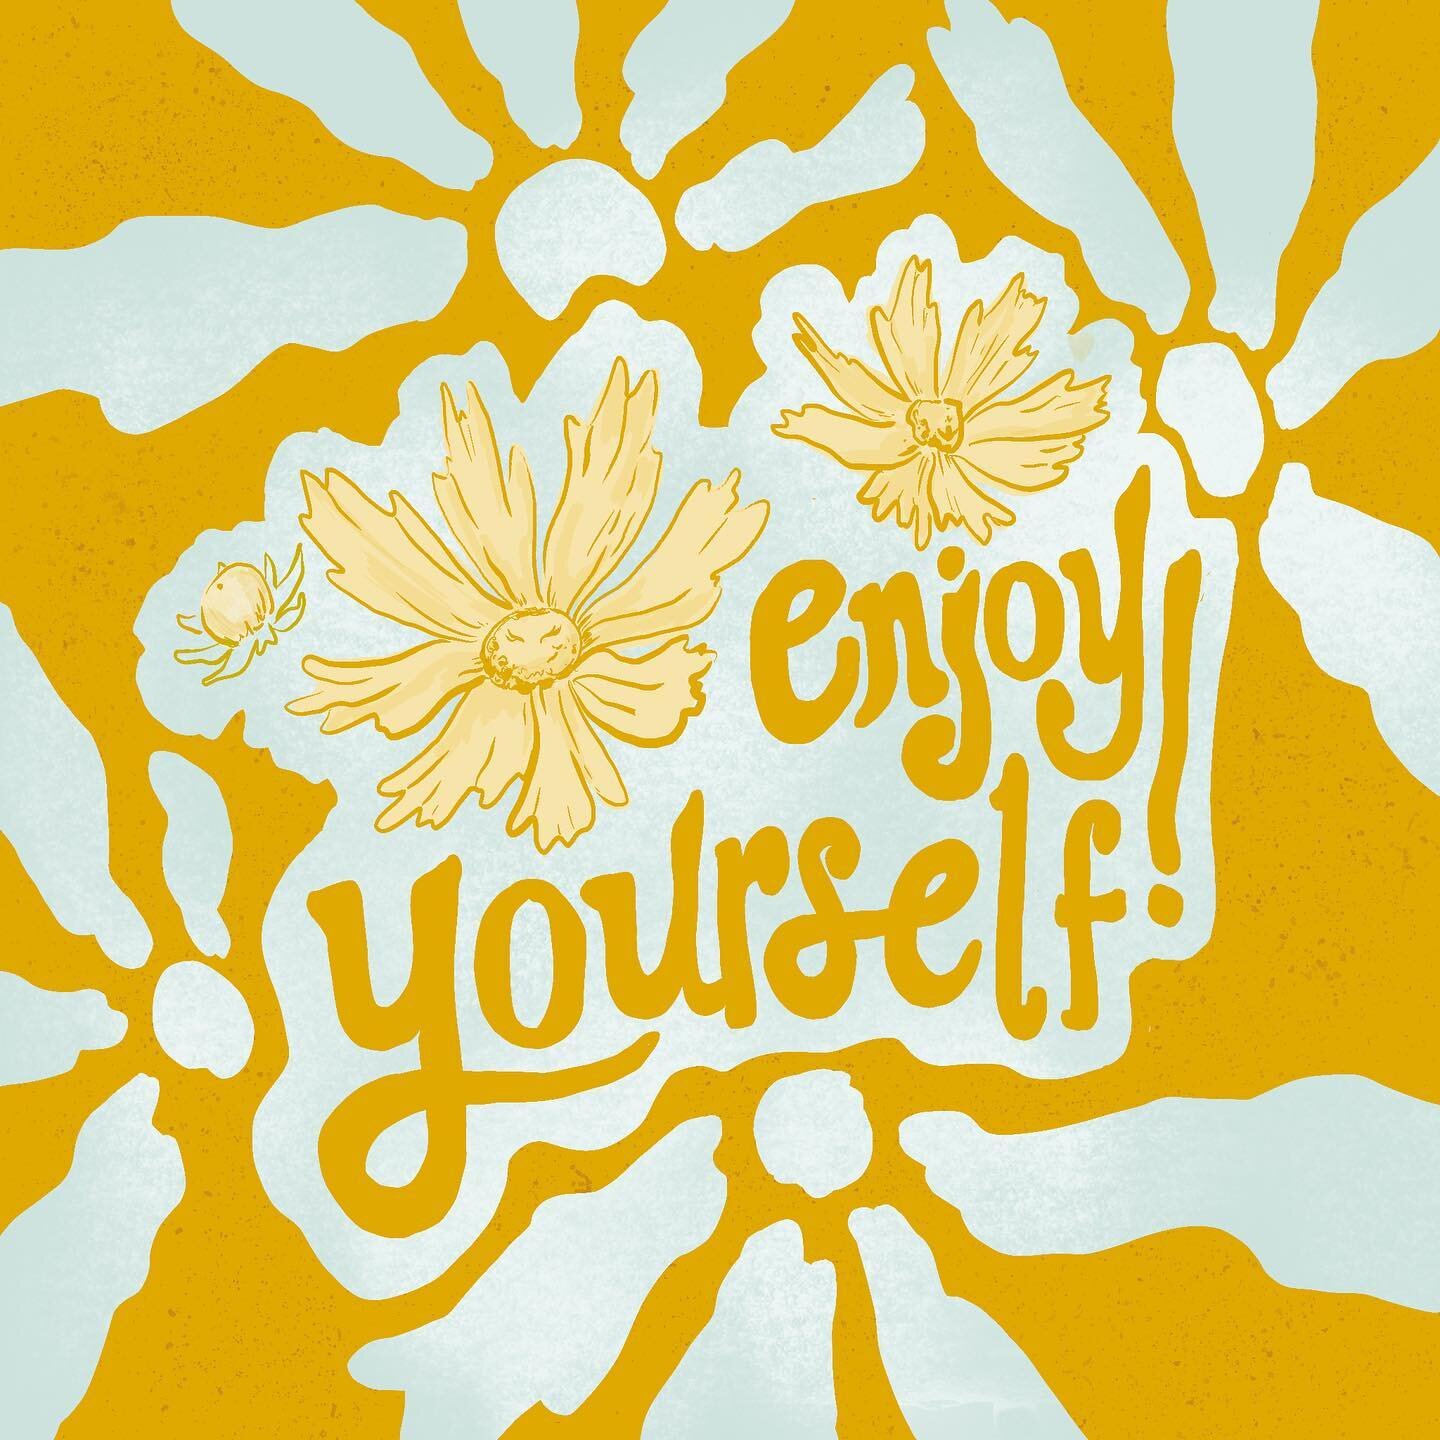 Enjoy yourself.  I&rsquo;ve been contemplating these simple words ever since my therapist said them in signing off. And they sent that &ldquo;knowing&rdquo; shiver through my bones. 

I tend to focus on extending my capacity to hold anxiety, stress, 